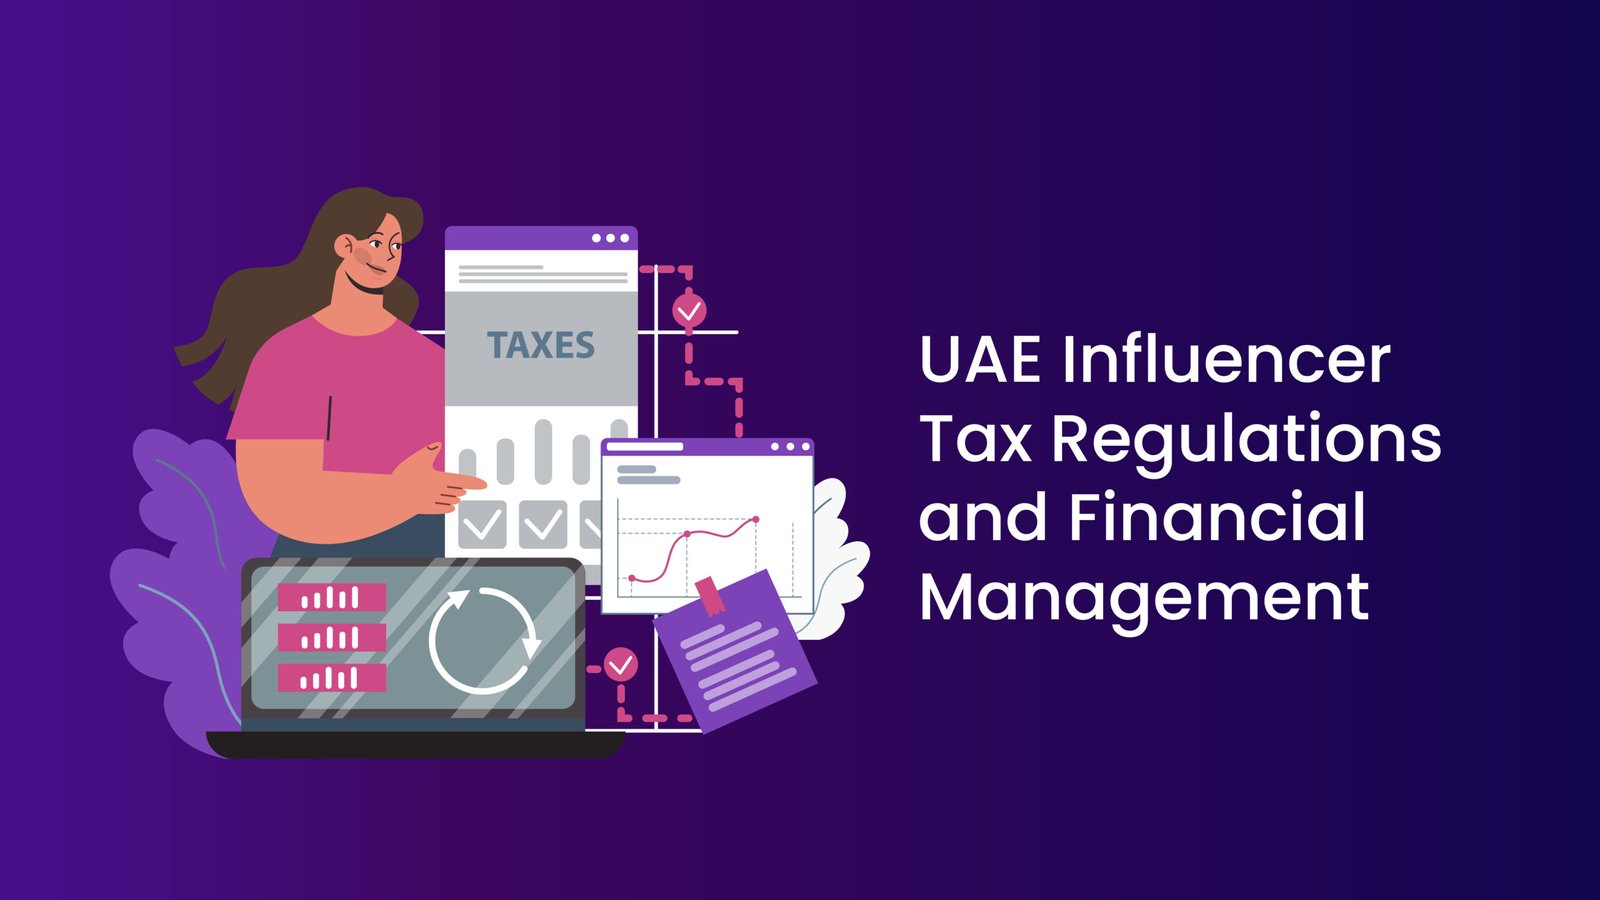 UAE Influencer Tax Regulations and Financial Management